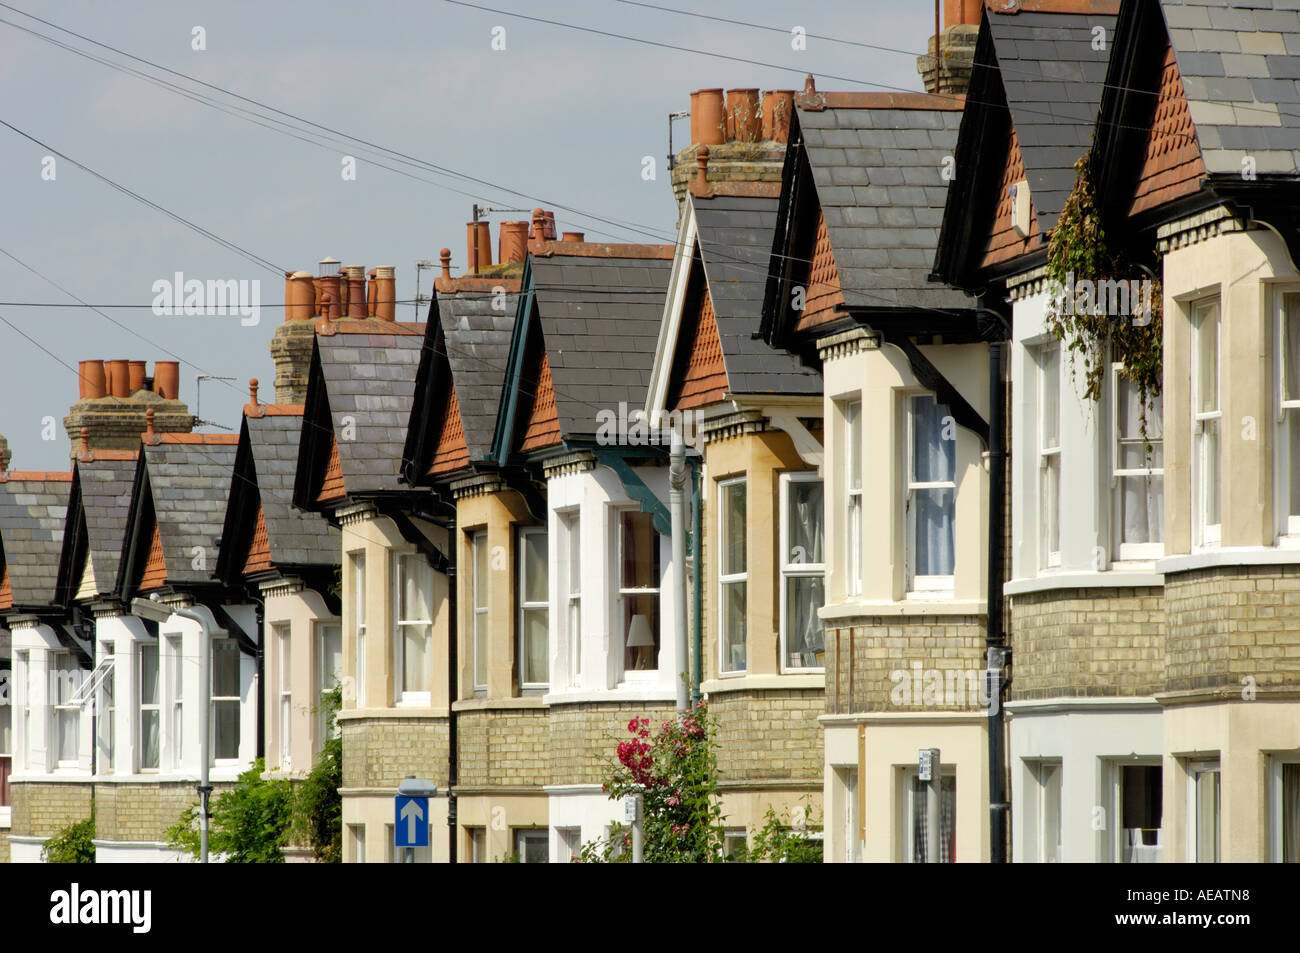 Row of Period Houses in united kingdom Stock Photo